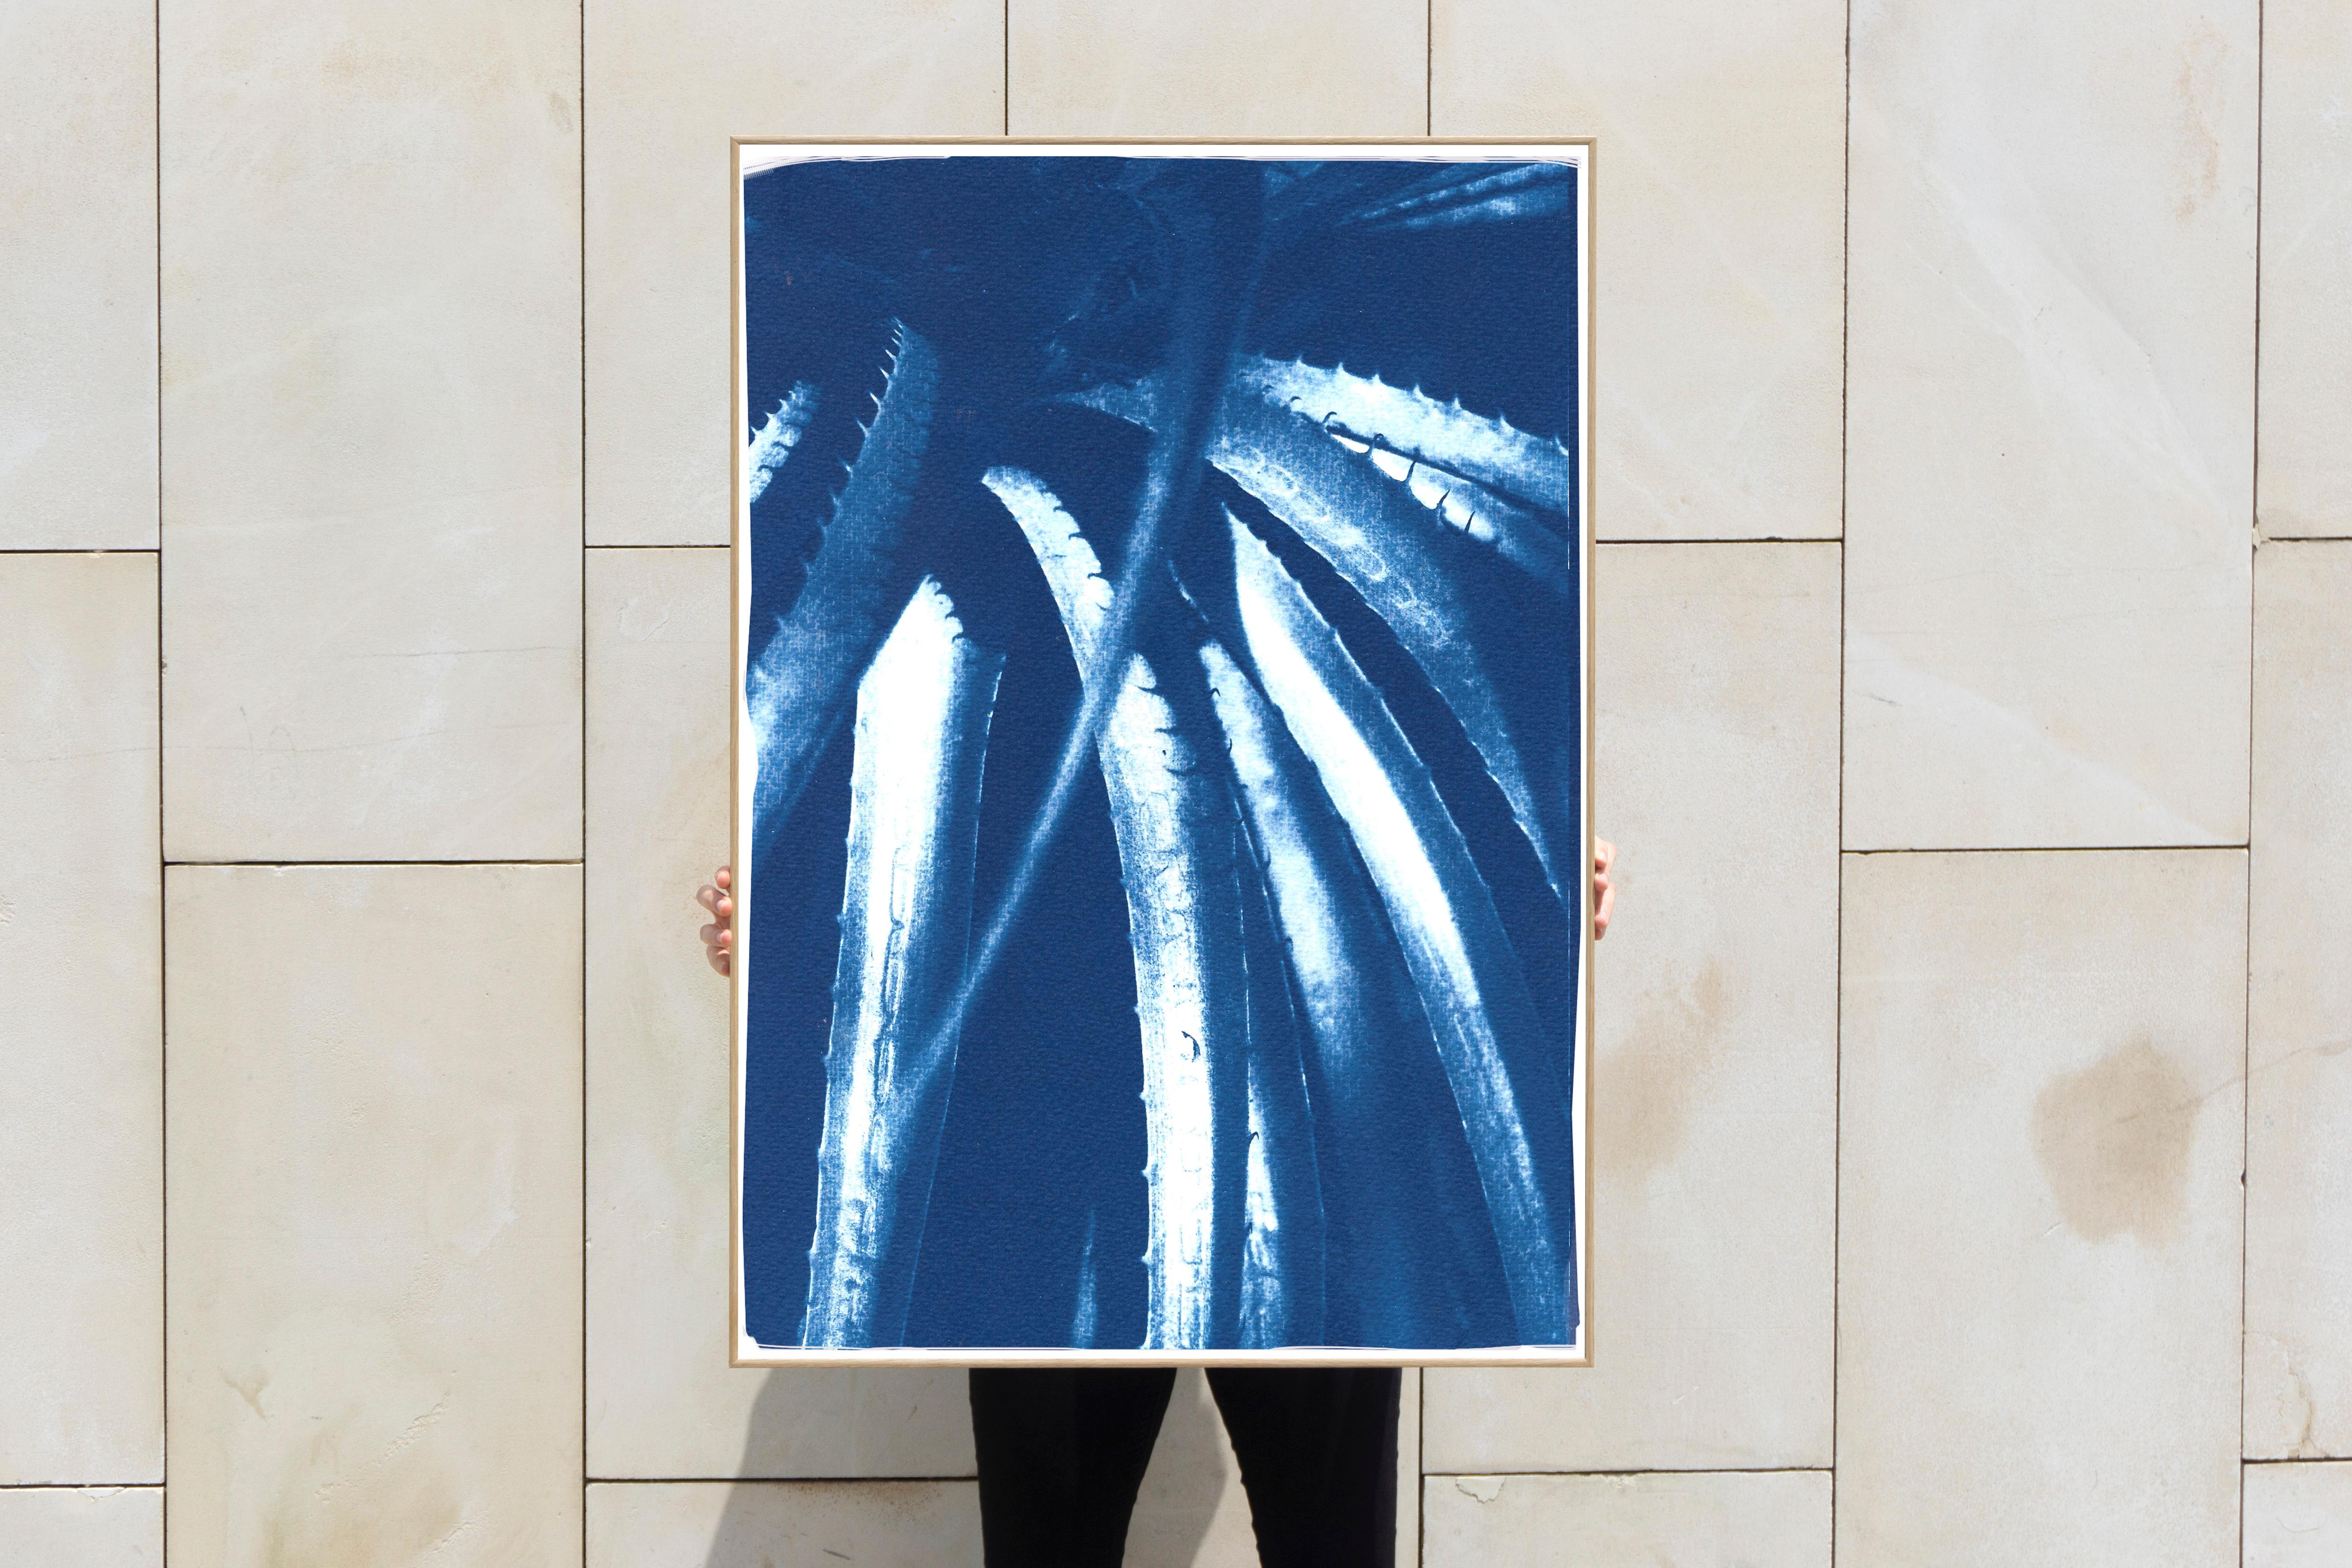 This is an exclusive handprinted limited edition cyanotype of a beautiful Aloe plant.

Details:
+ Title: Jurassic Aloe Leaves
+ Year: 2021
+ Edition Size: 100
+ Stamped and Certificate of Authenticity provided
+ Measurements : 70x100 cm (28x 40